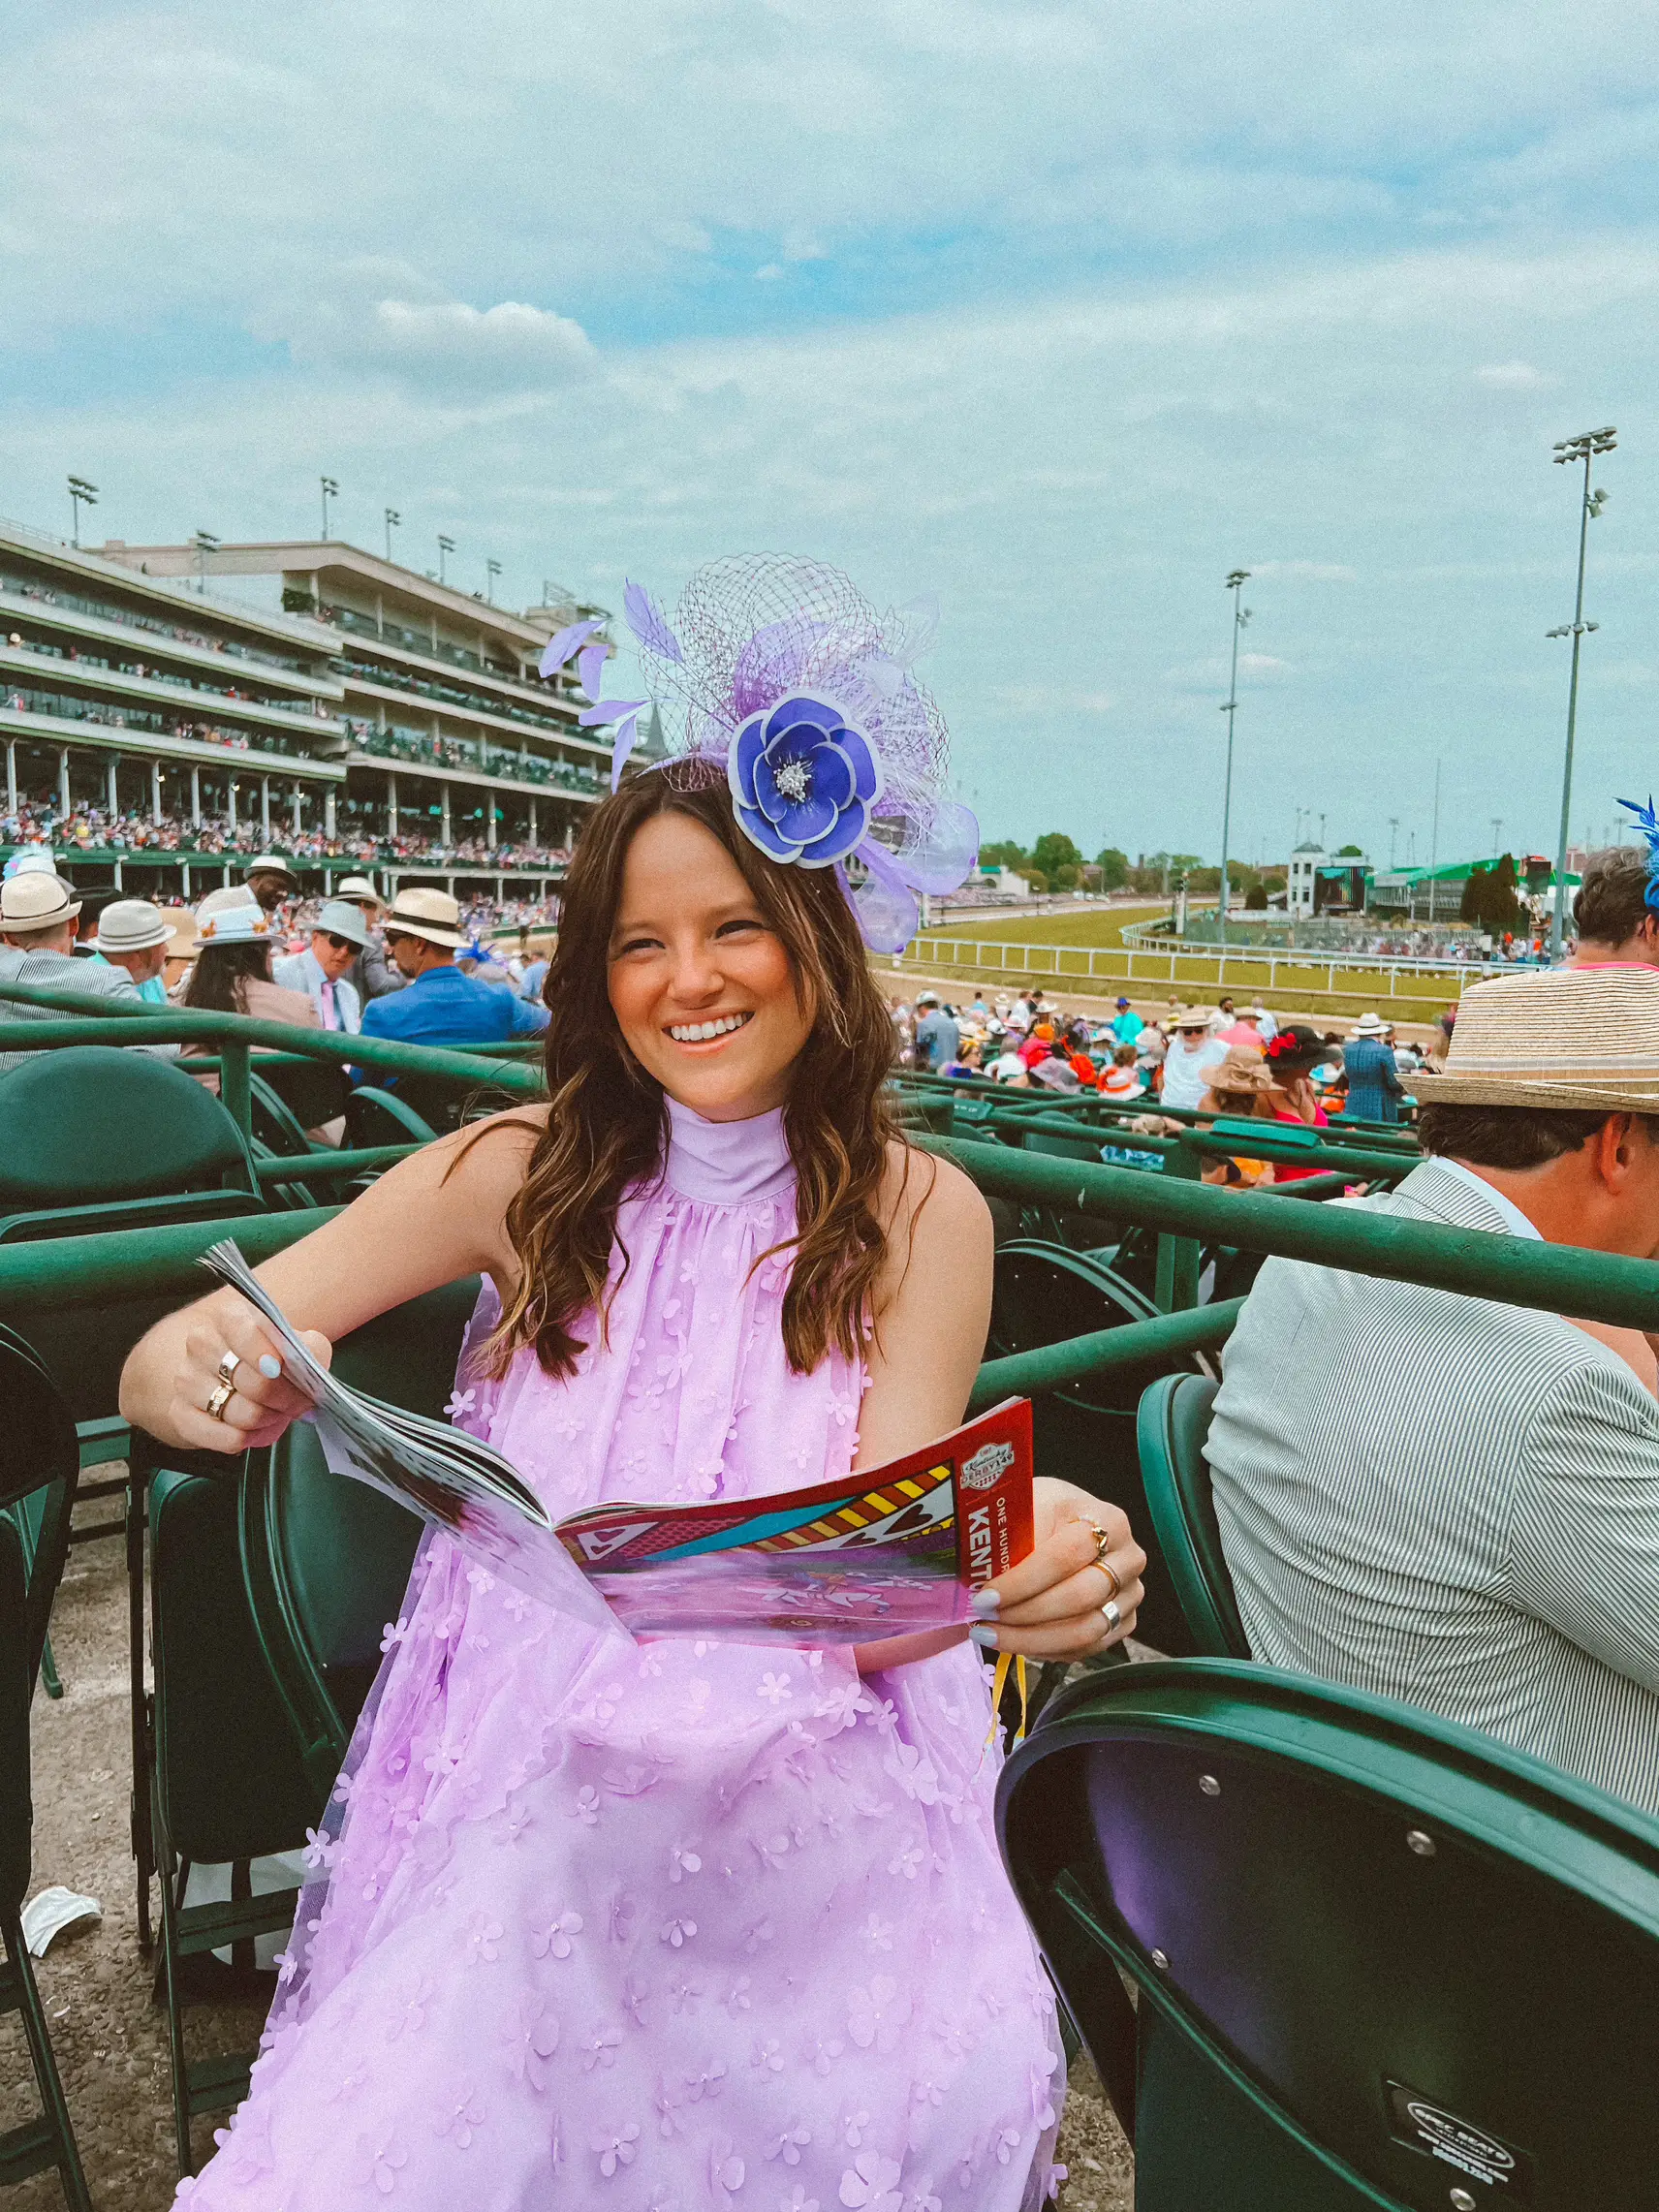 What to Wear to the Kentucky Derby: 3 Derby Day Oufit Ideas